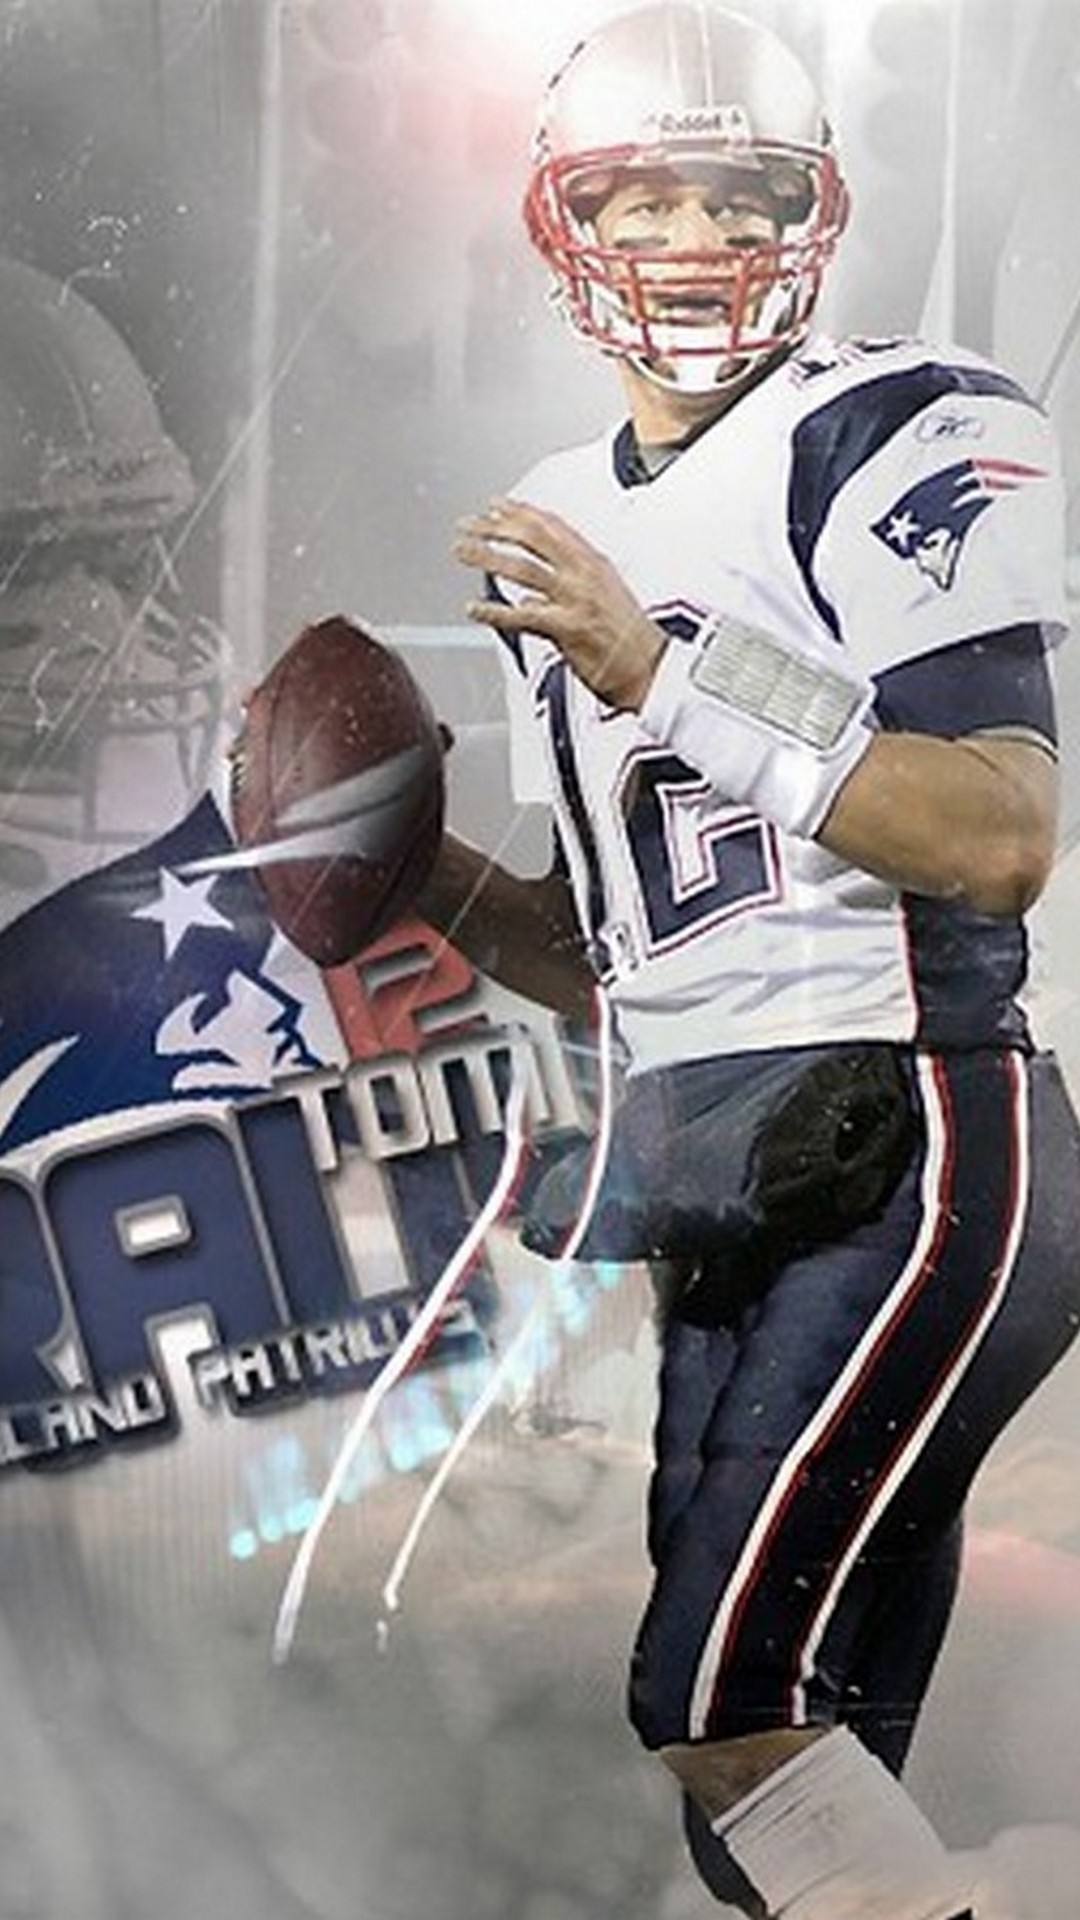 Tom Brady iPhone 6 Wallpaper HD with high-resolution 1080x1920 pixel. Download all Mobile Wallpapers and Use them as wallpapers for your iPhone, Tablet, iPad, Android and other mobile devices